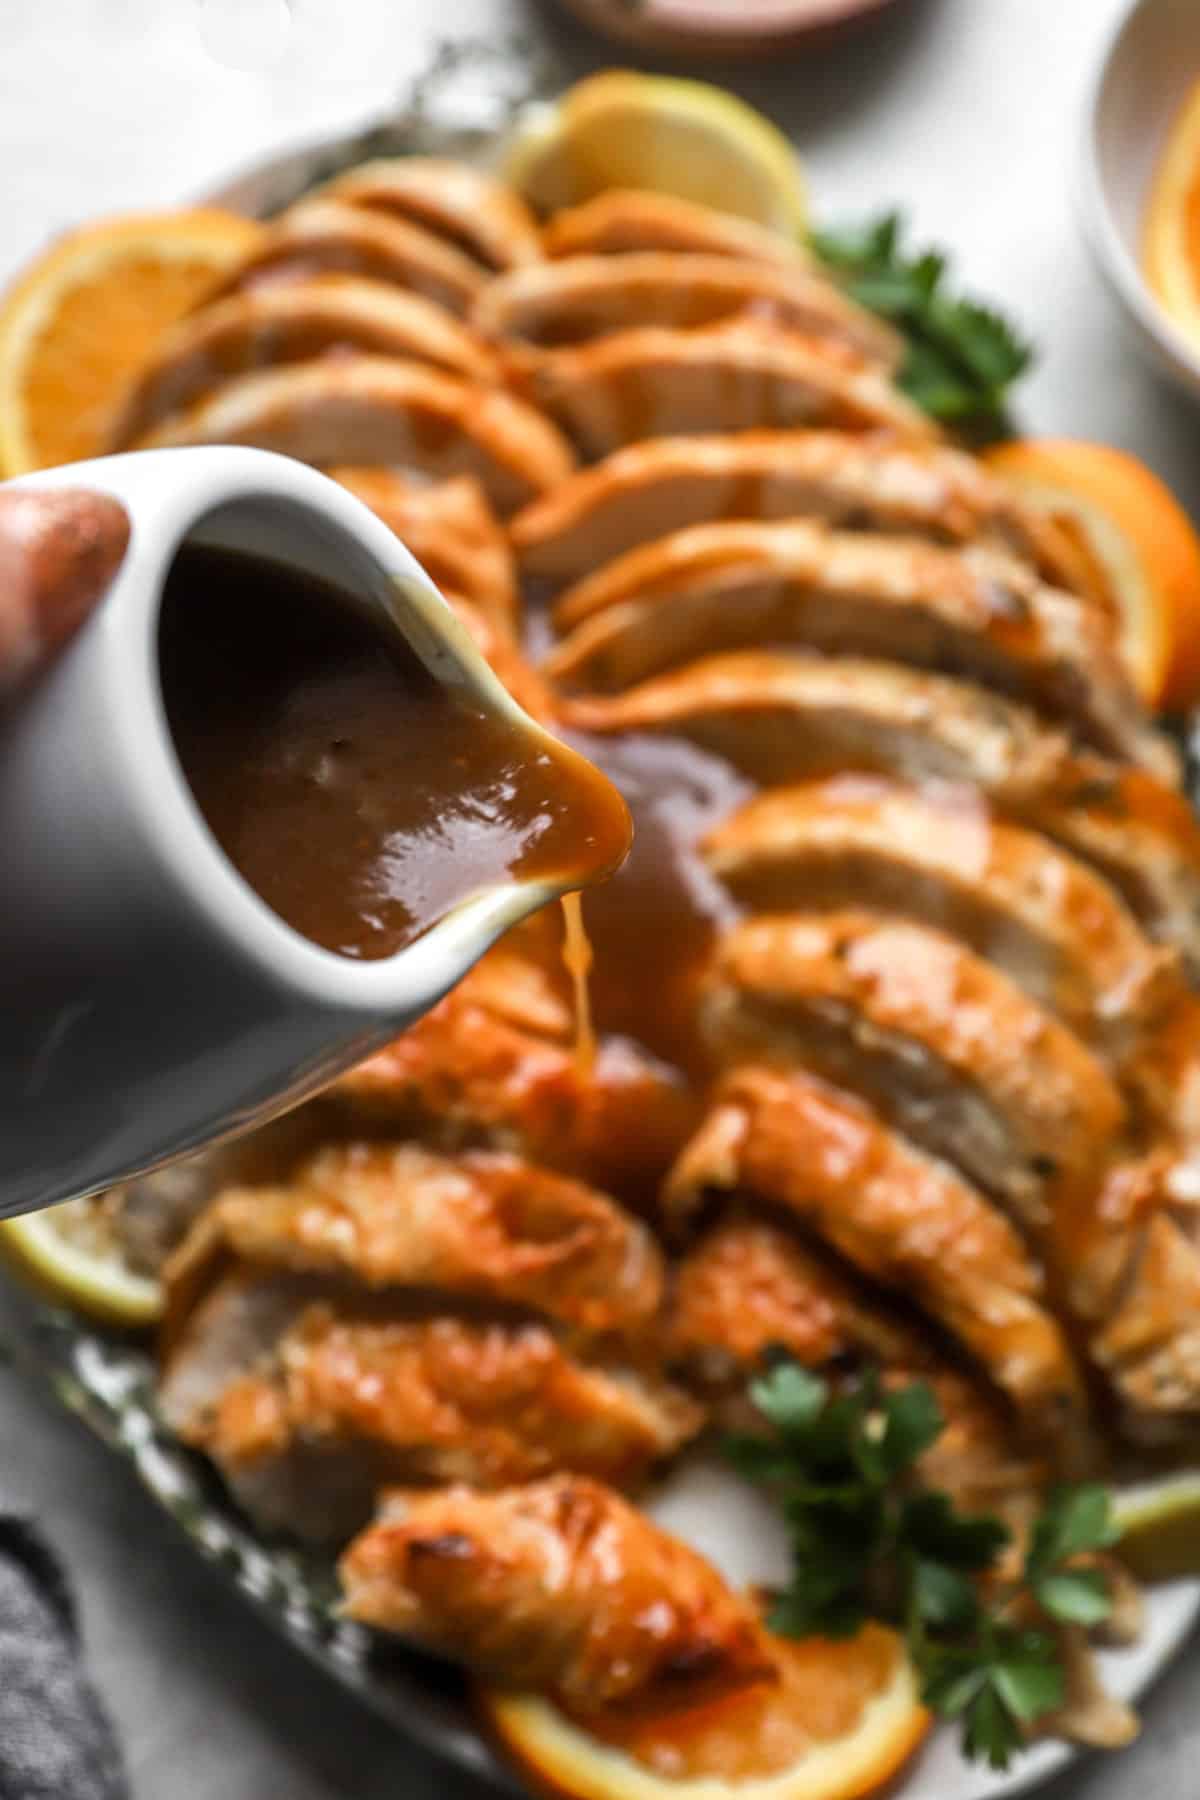 a small pitcher of turkey gravy being poured over a sliced roast turkey.